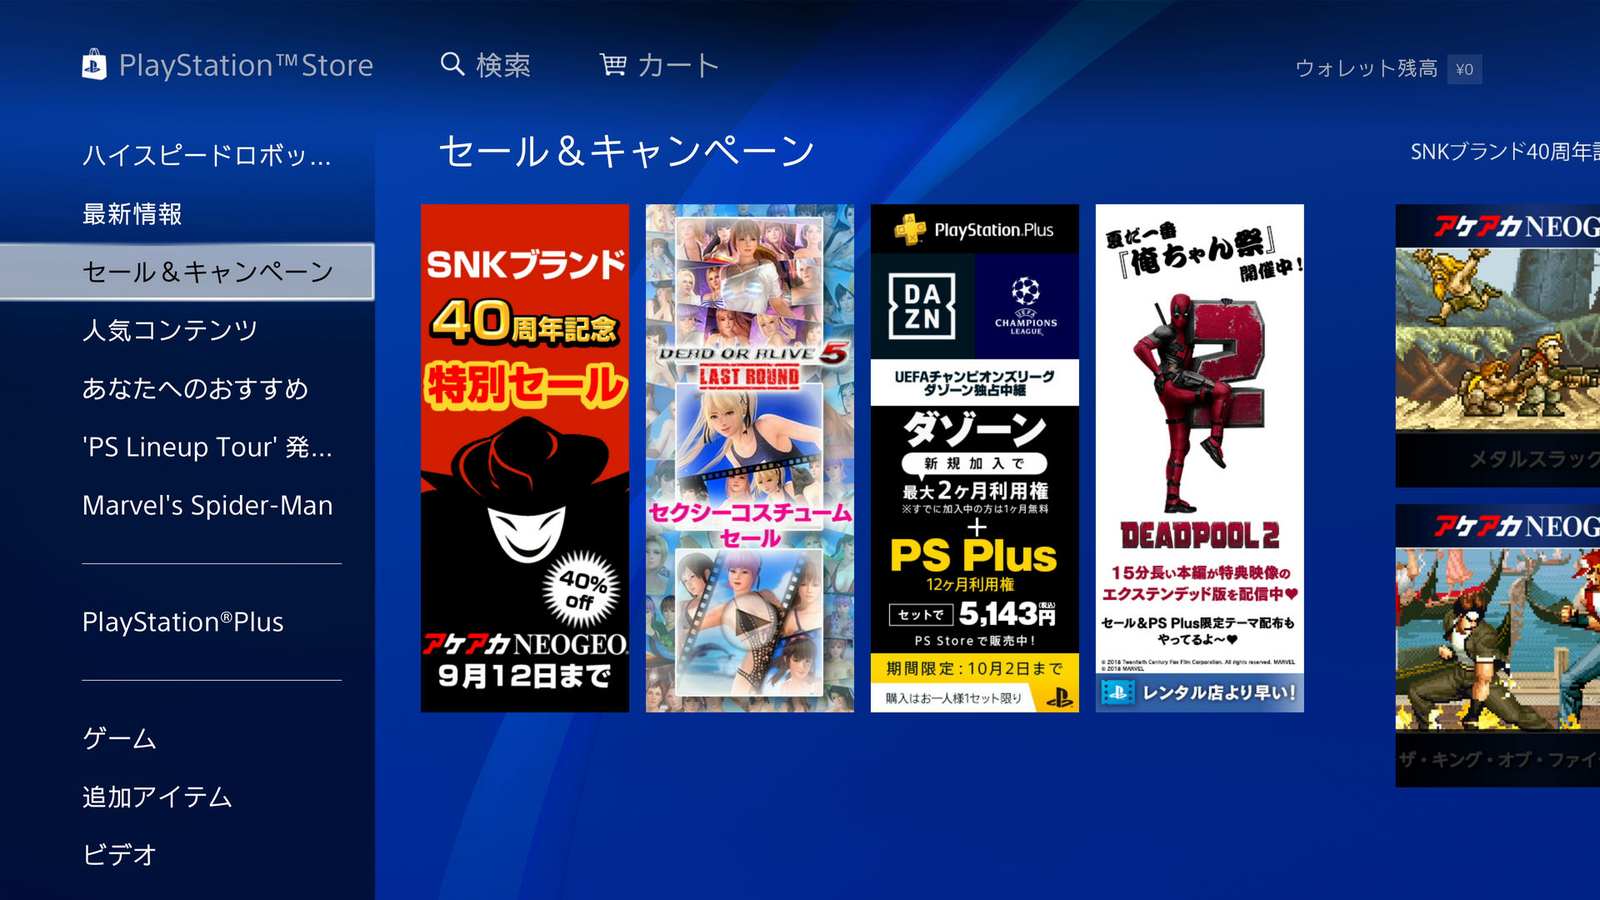 How to Use a Japanese PSN Account on PS Vita Without Losing Your Data